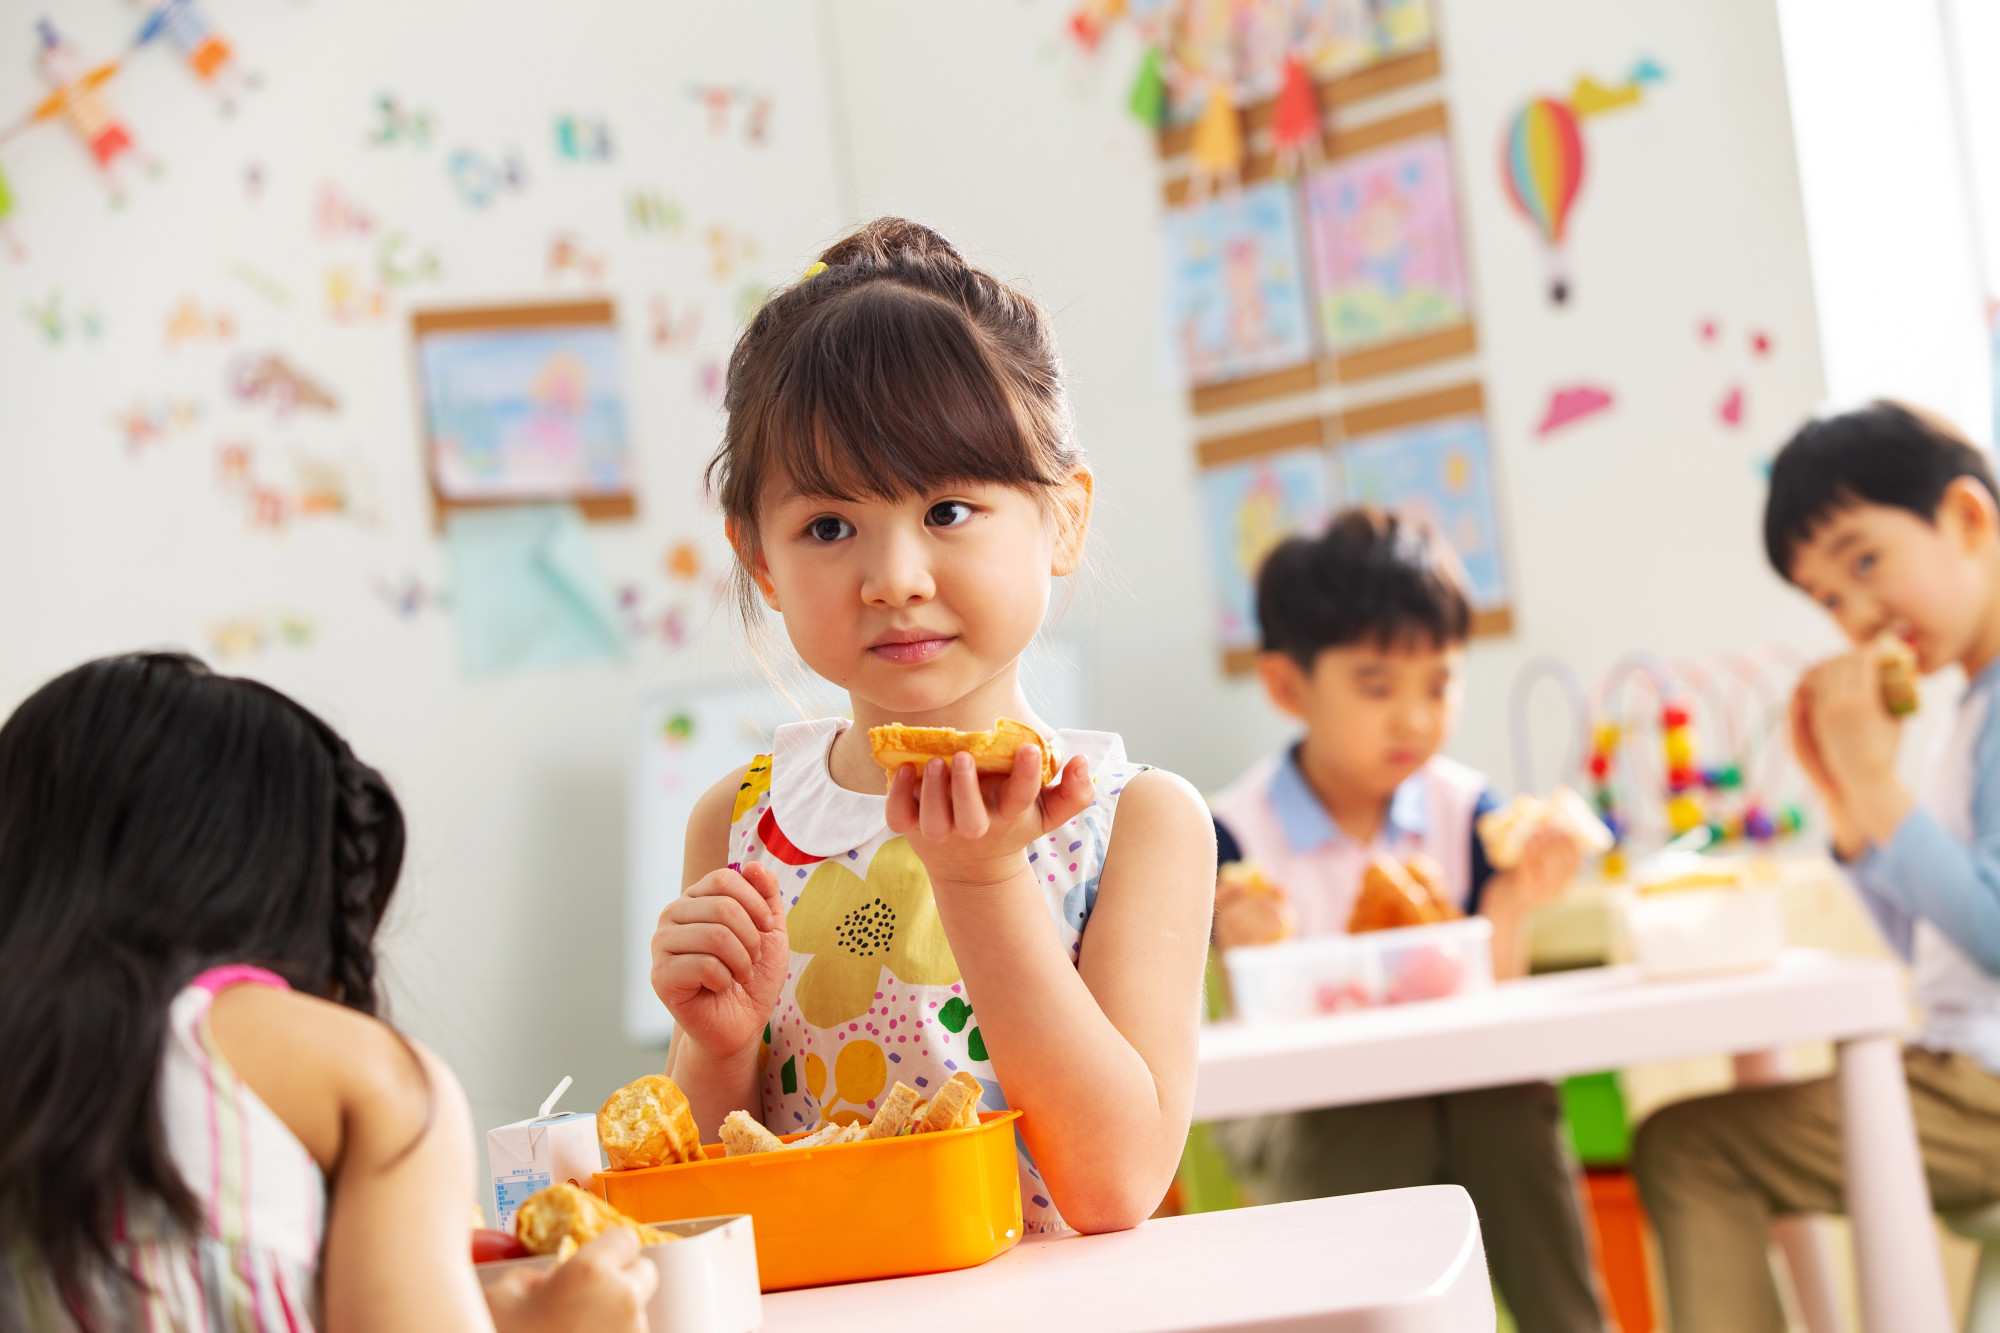 Despite crackdowns in recent years to raise food safety standards in schools, hygiene scandals remain common in China. Photo: Shutterstock